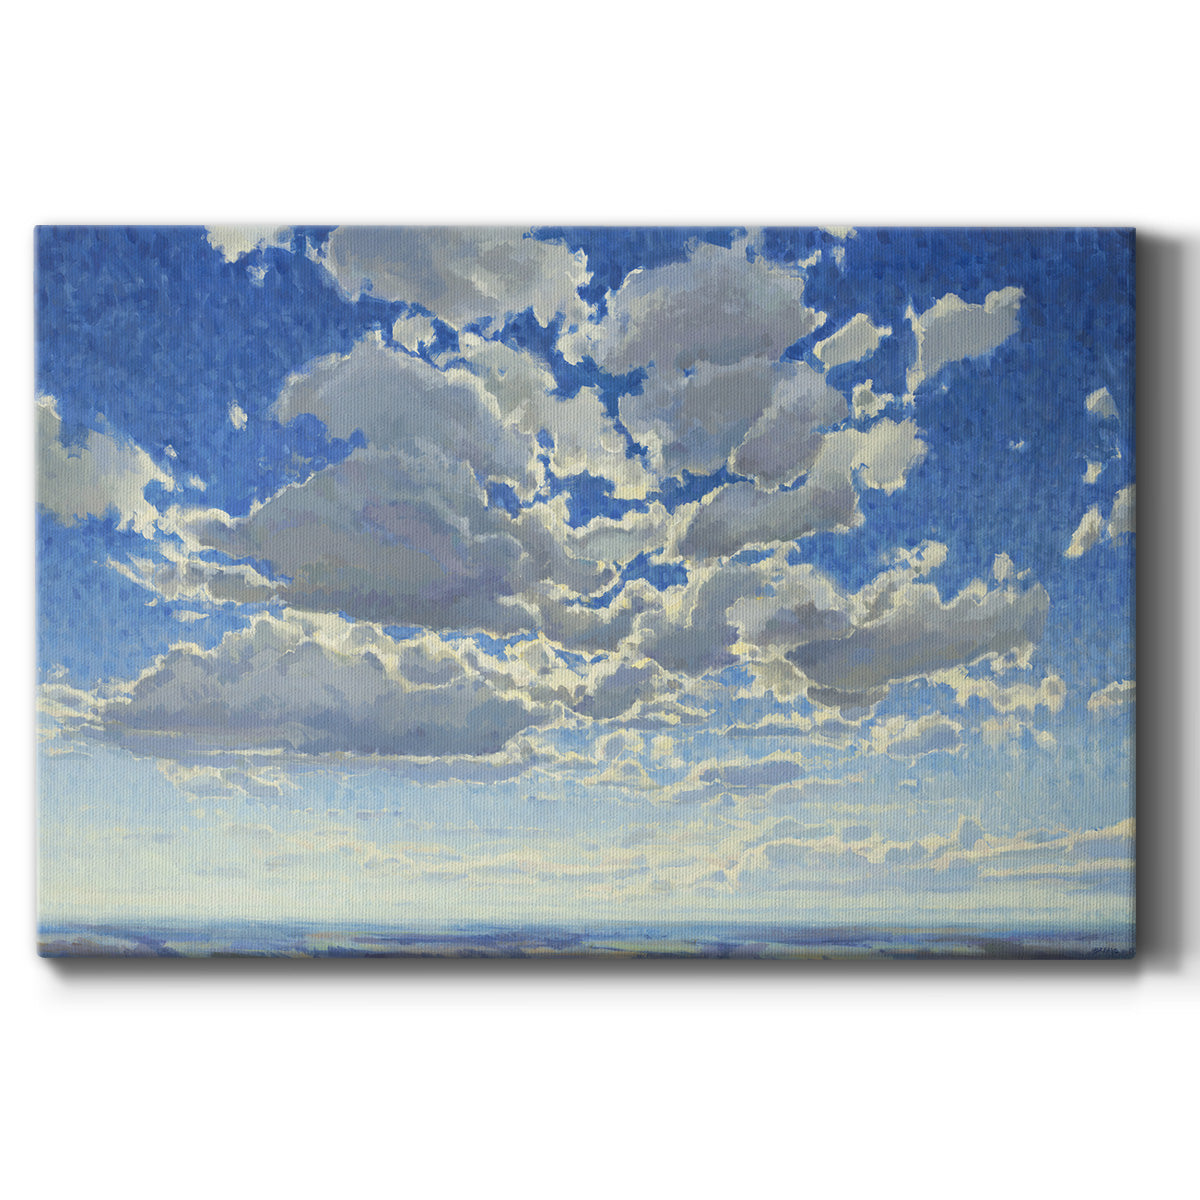 UBRM165 Premium Gallery Wrapped Canvas - Ready to Hang